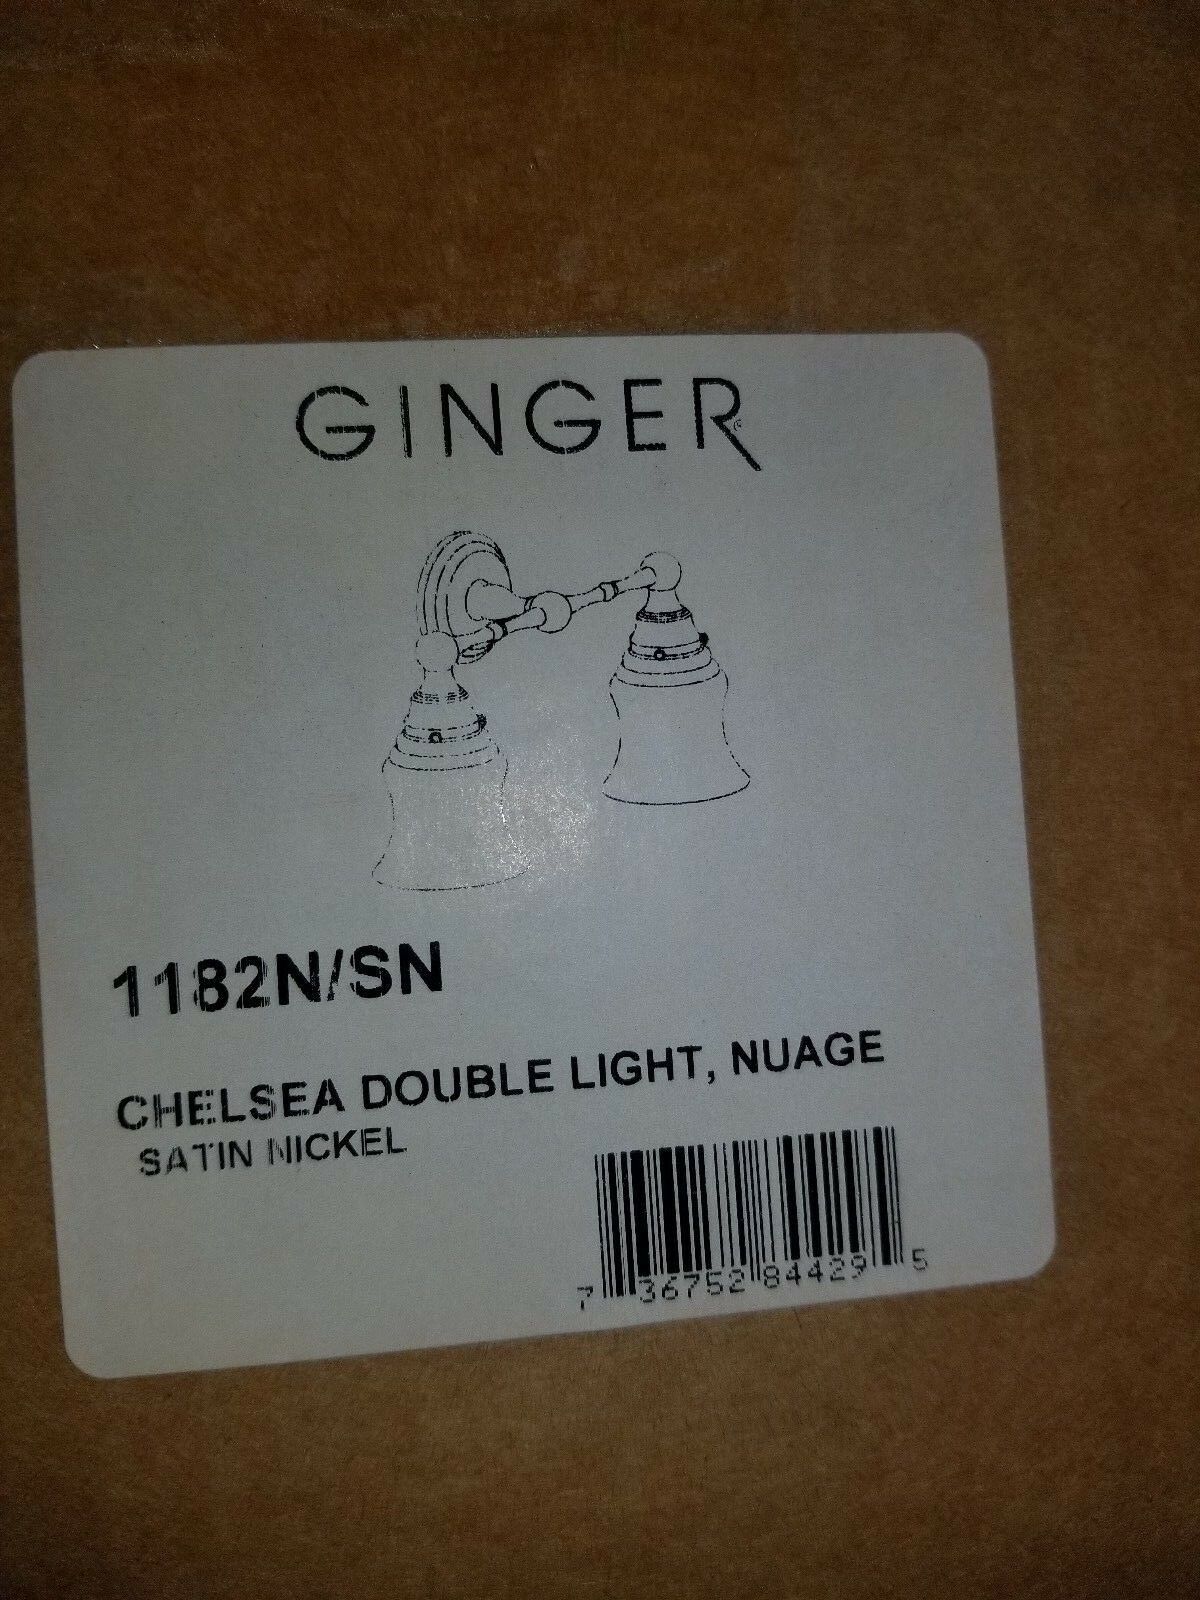 Ginger 1182N/SN CHELSEA DOUBLE LIGHTS NUAGE - $242.55